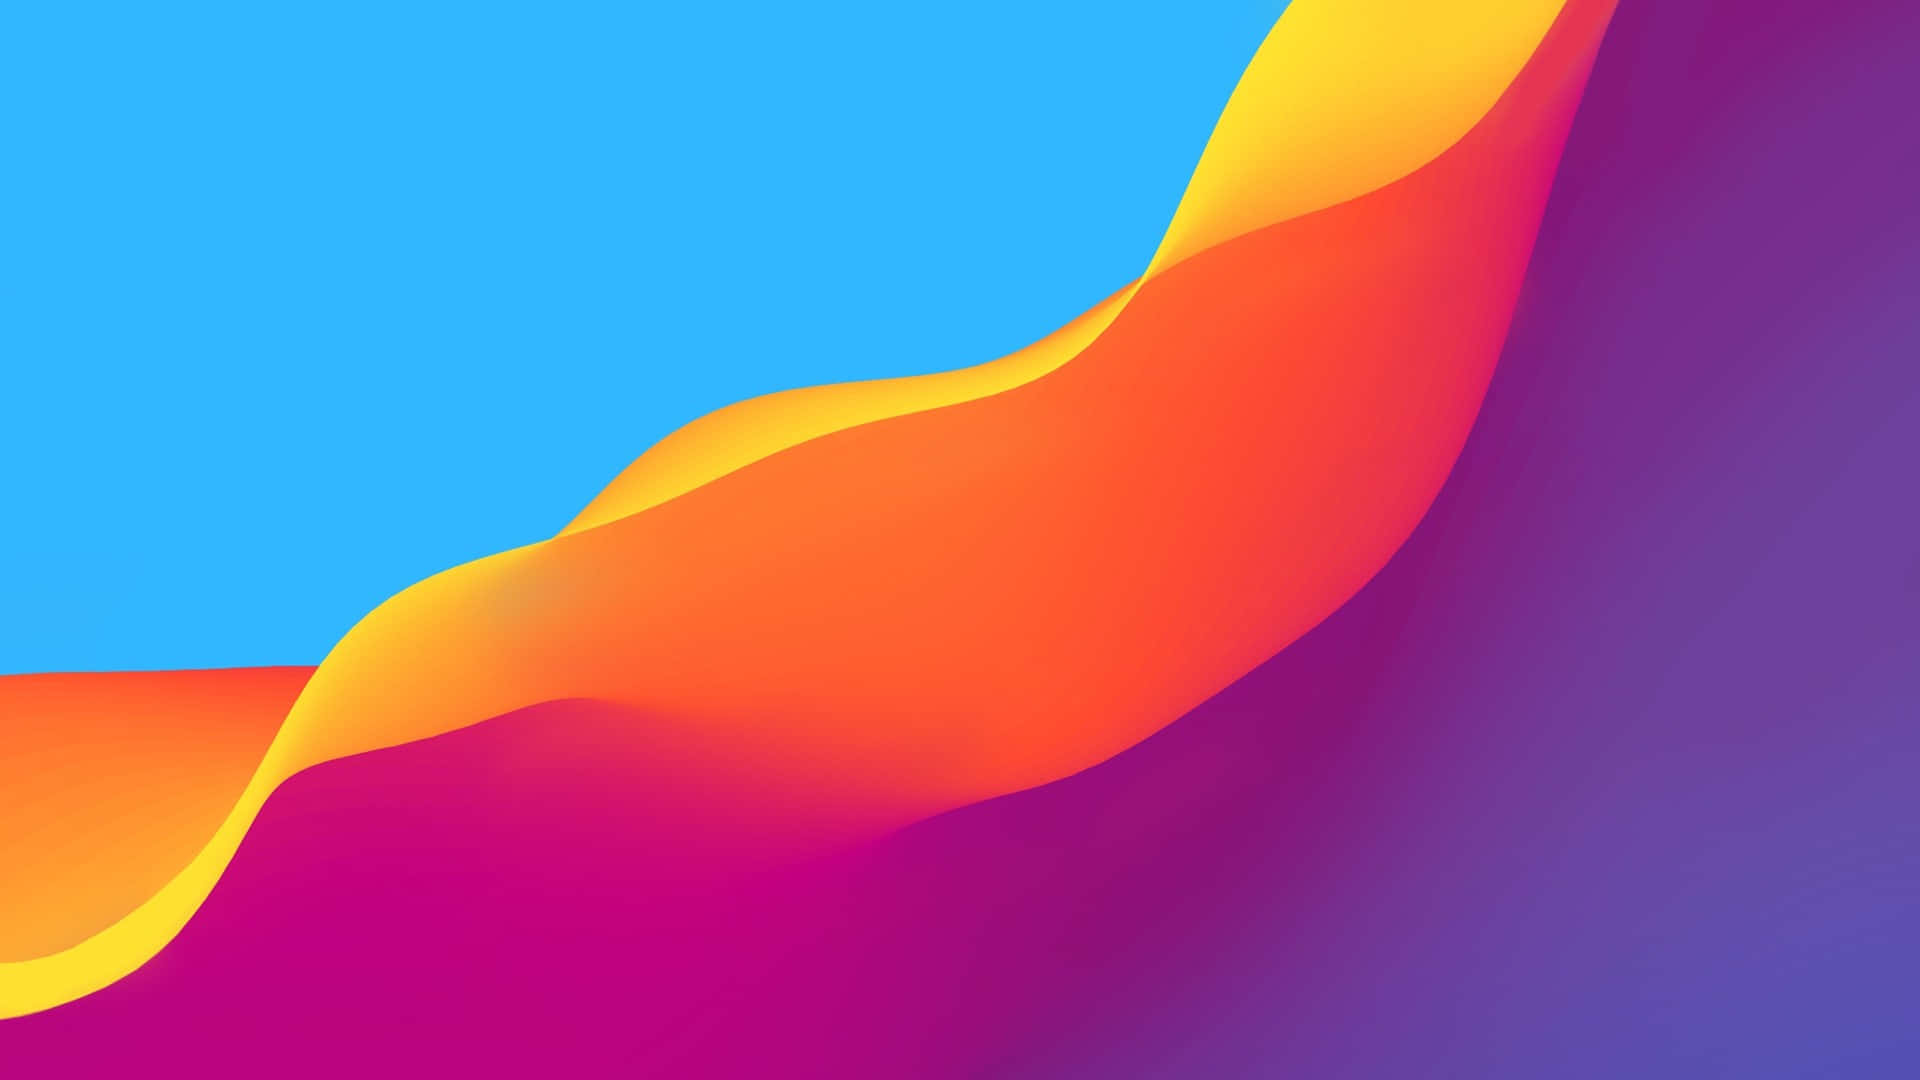 A Colorful And Colorful Background With A Wave Wallpaper